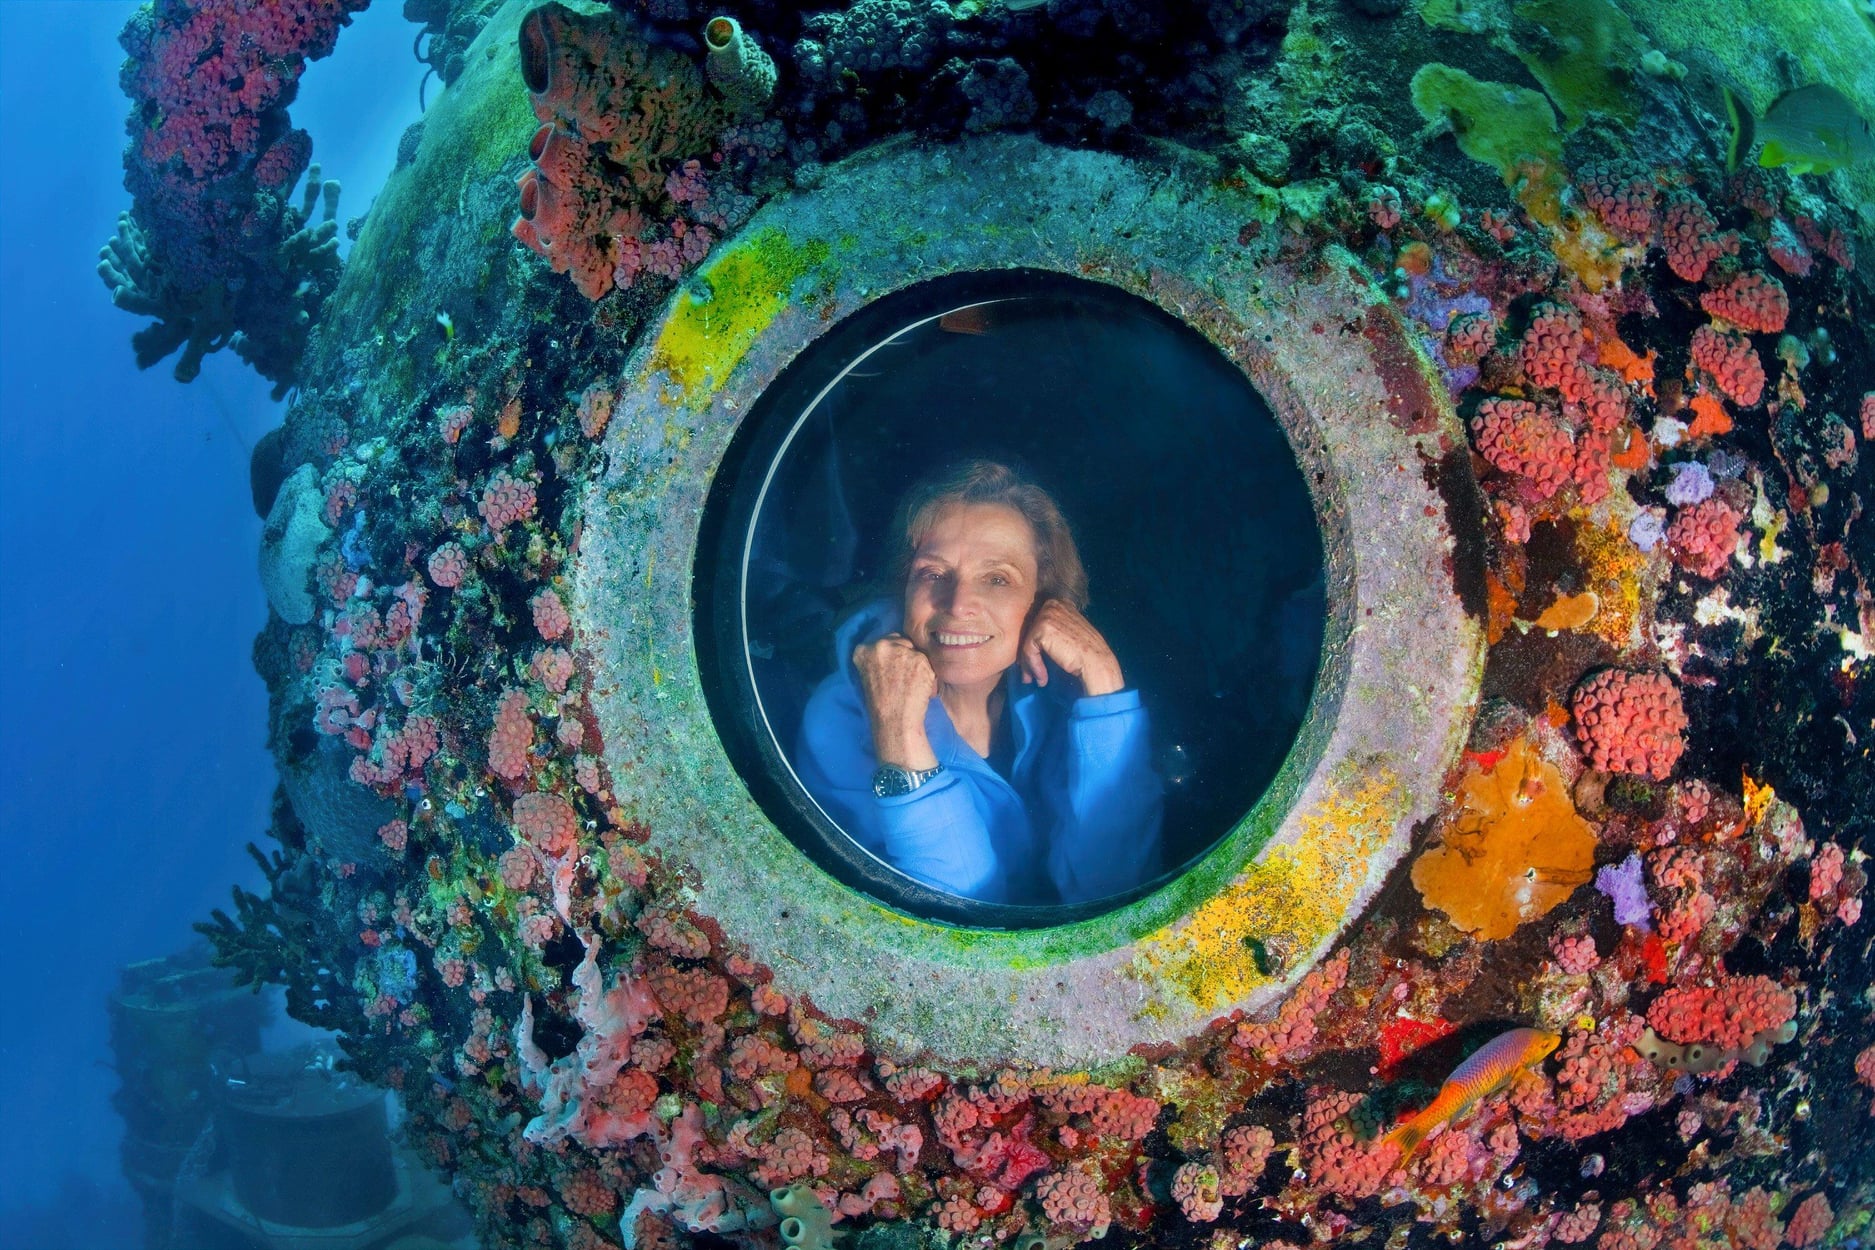 Sylvia Earle, Speaking Fee, Booking Agent, & Contact Info